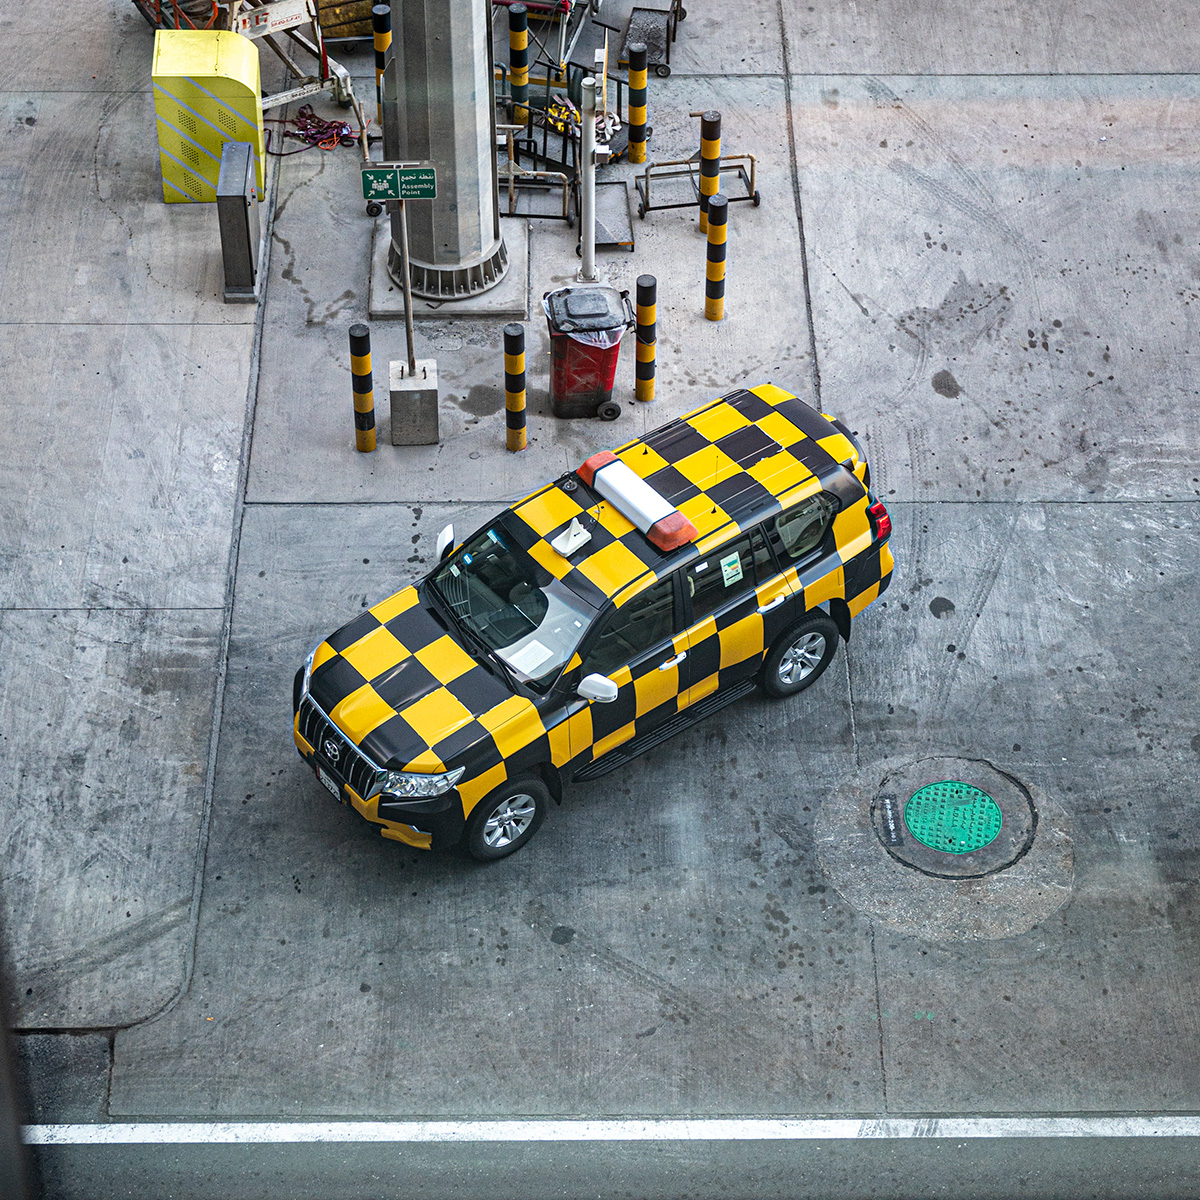 A photo of a black and yellow checkered SUV on the tarmac of an airport